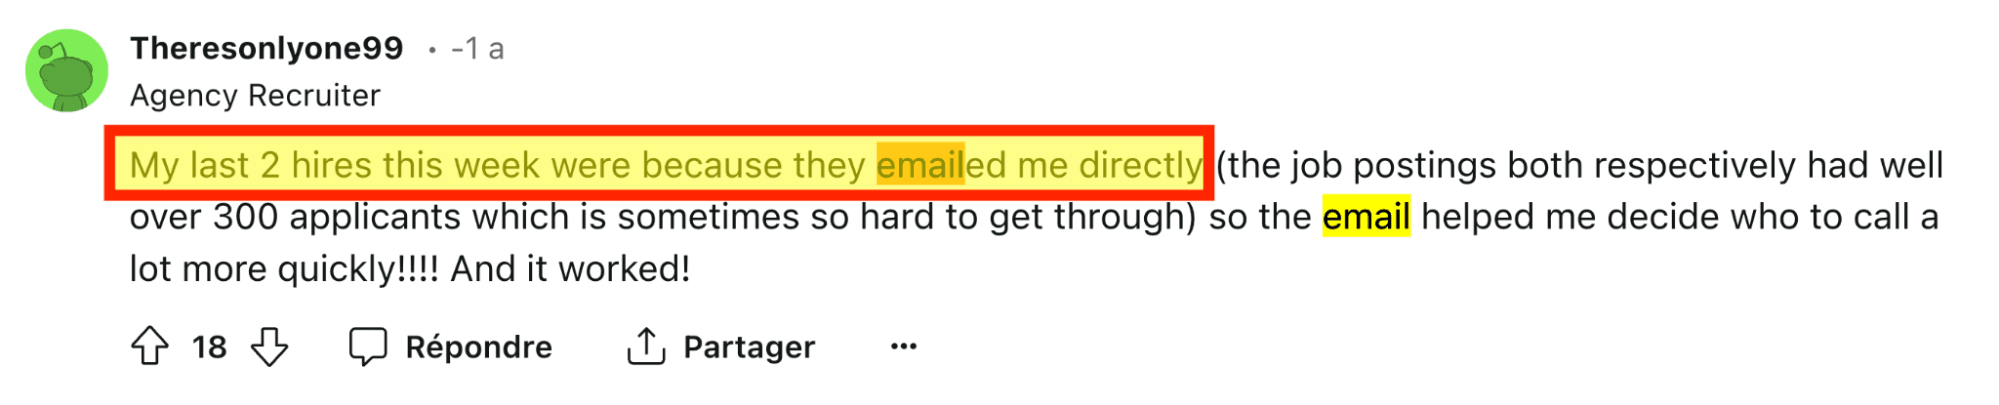 email help recruiters decide reddit thread - image14.png